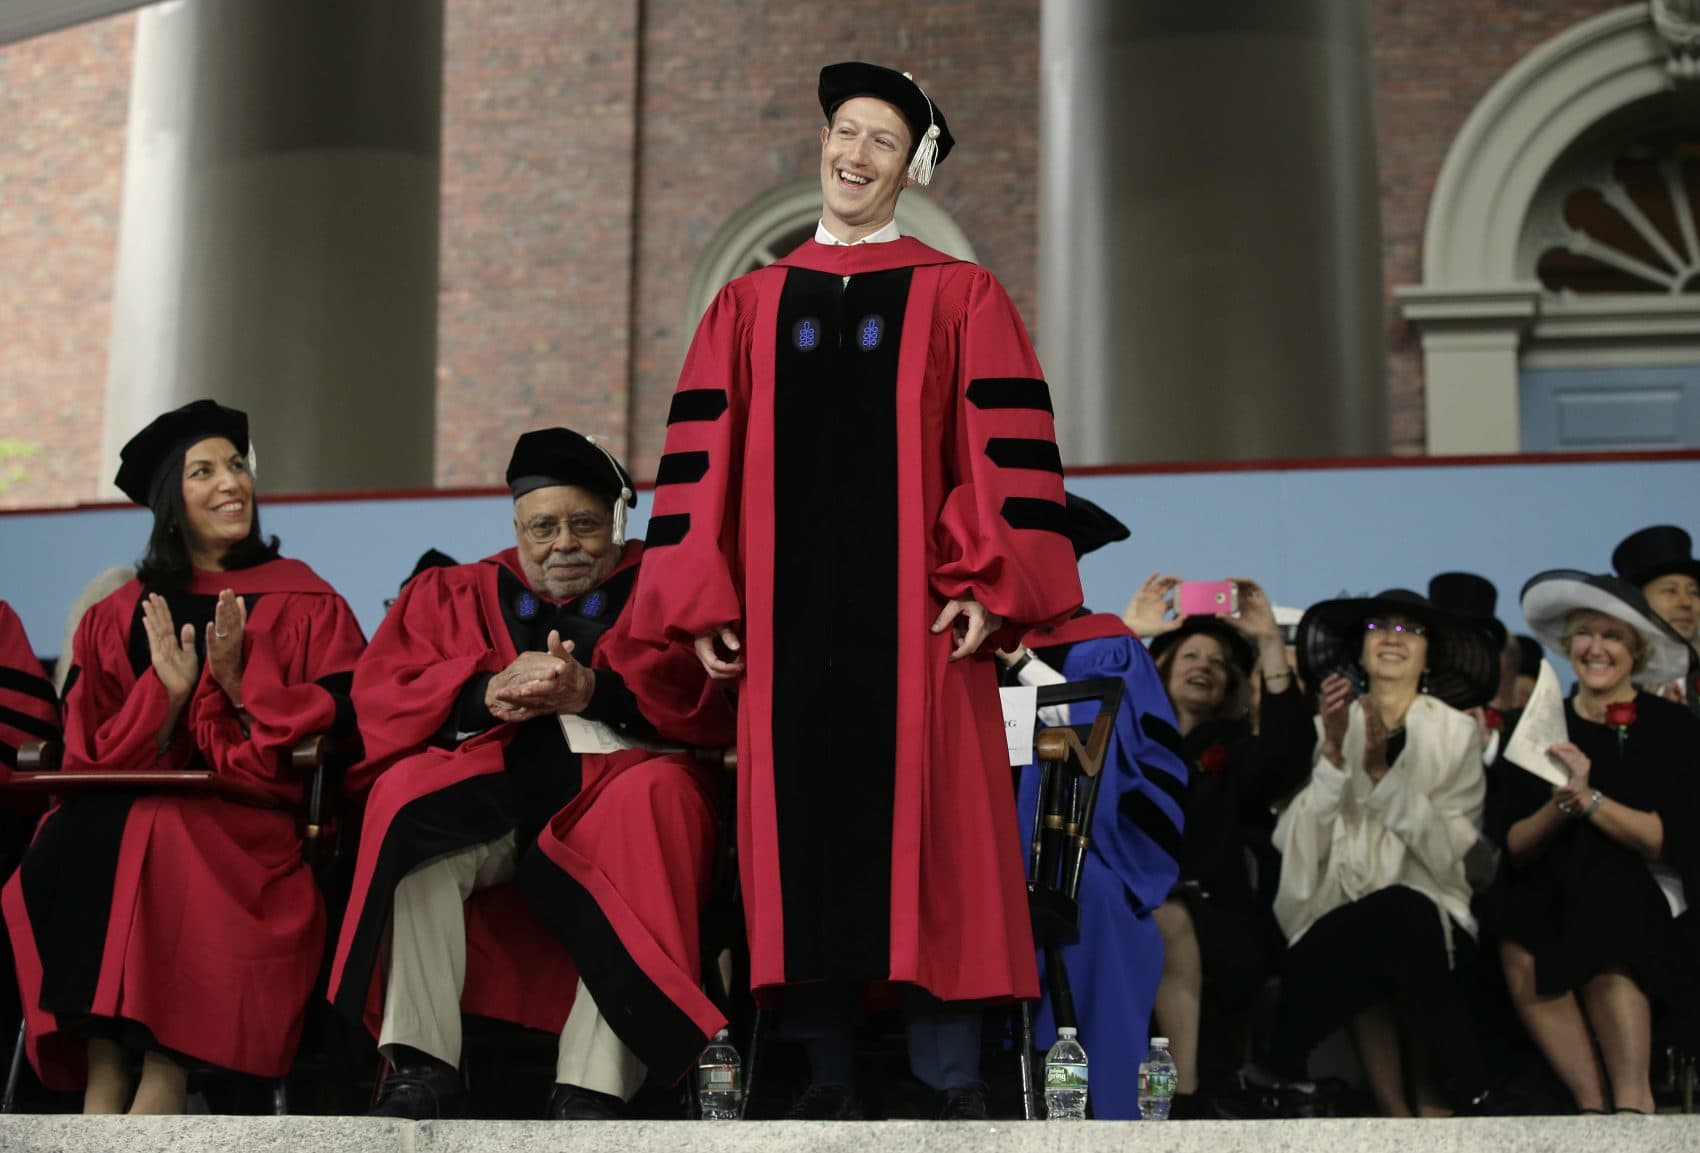 Facebook CEO and Harvard dropout Mark Zuckerberg, center, smiles as he is introduced before being presented with an honorary Doctor of Laws degree during Harvard University commencement exercises Thursday. (Steven Senne/AP)